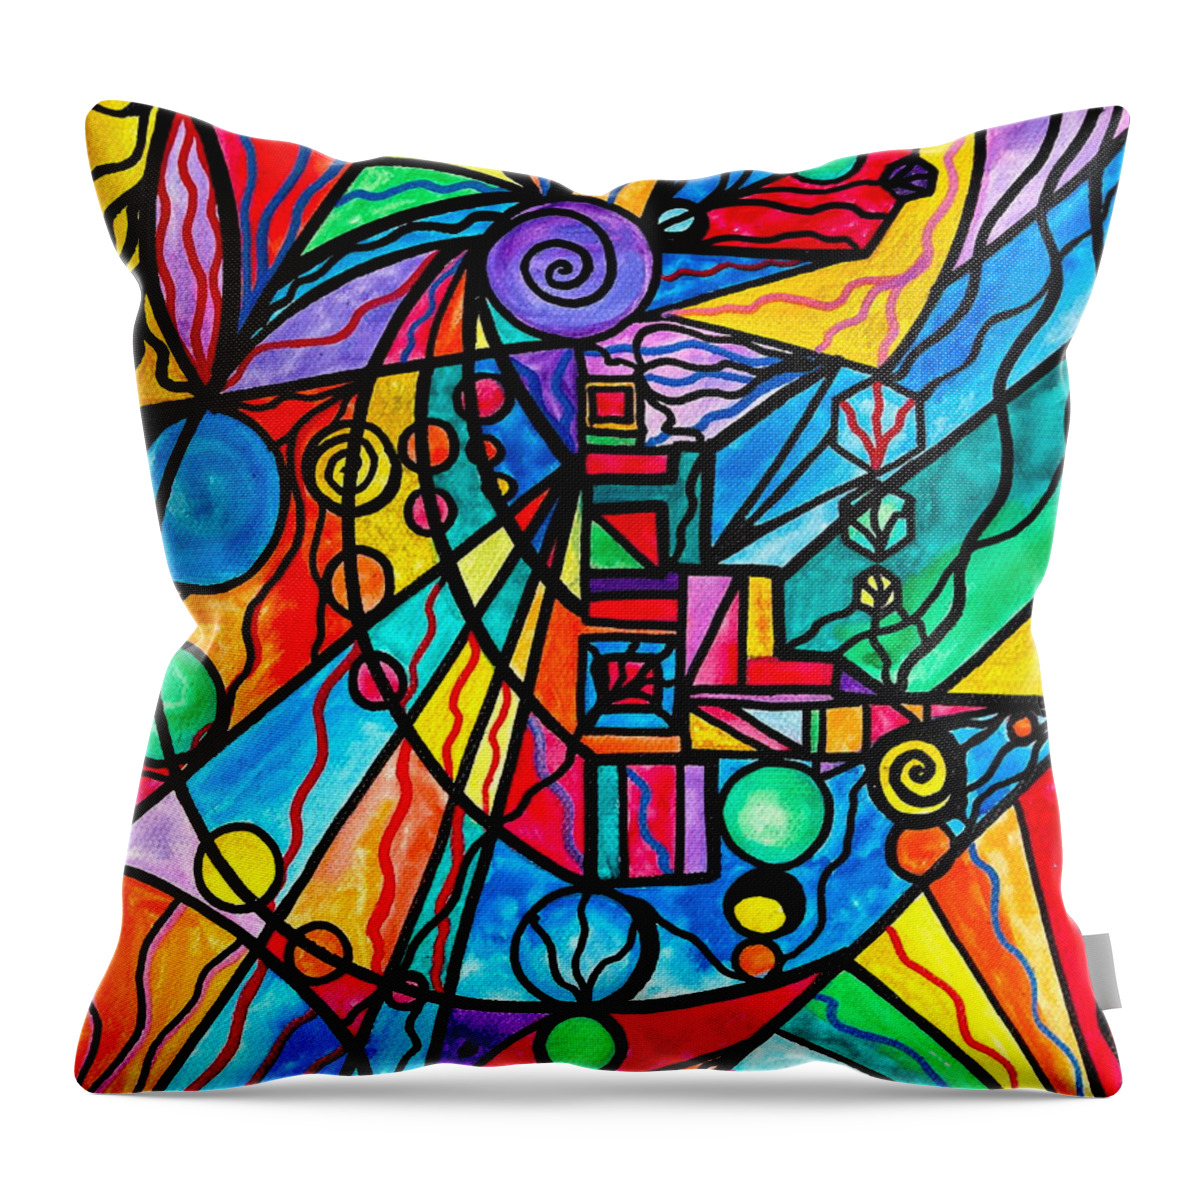 Frequency Painting Throw Pillow featuring the painting Lyra by Teal Eye Print Store